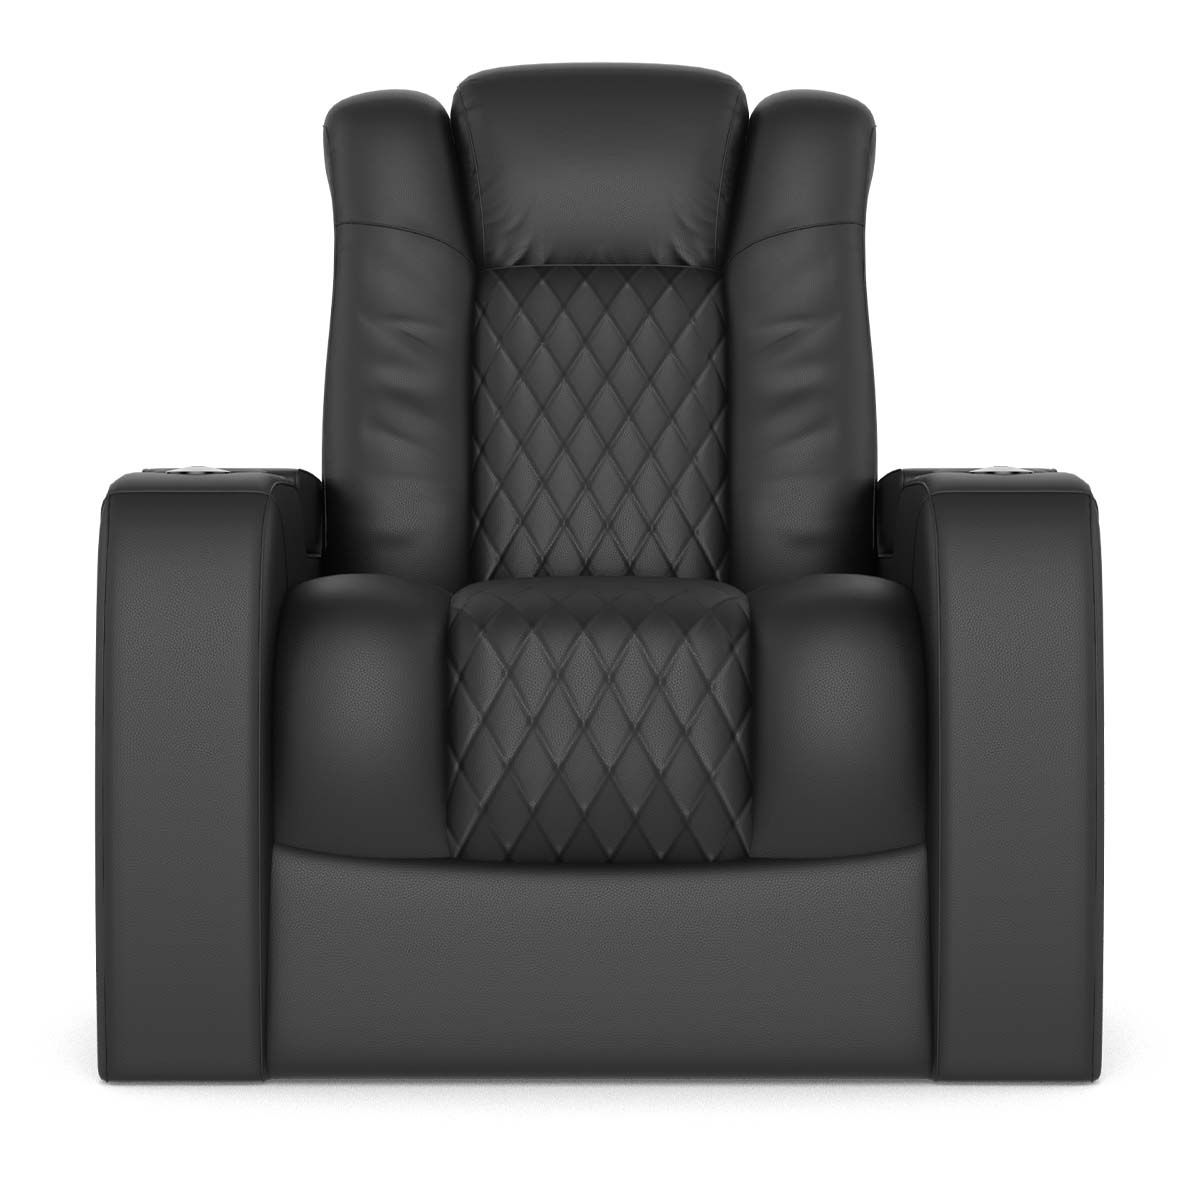 Audio Advice Revelation Home Theater Seating - front view of 2 arm chair